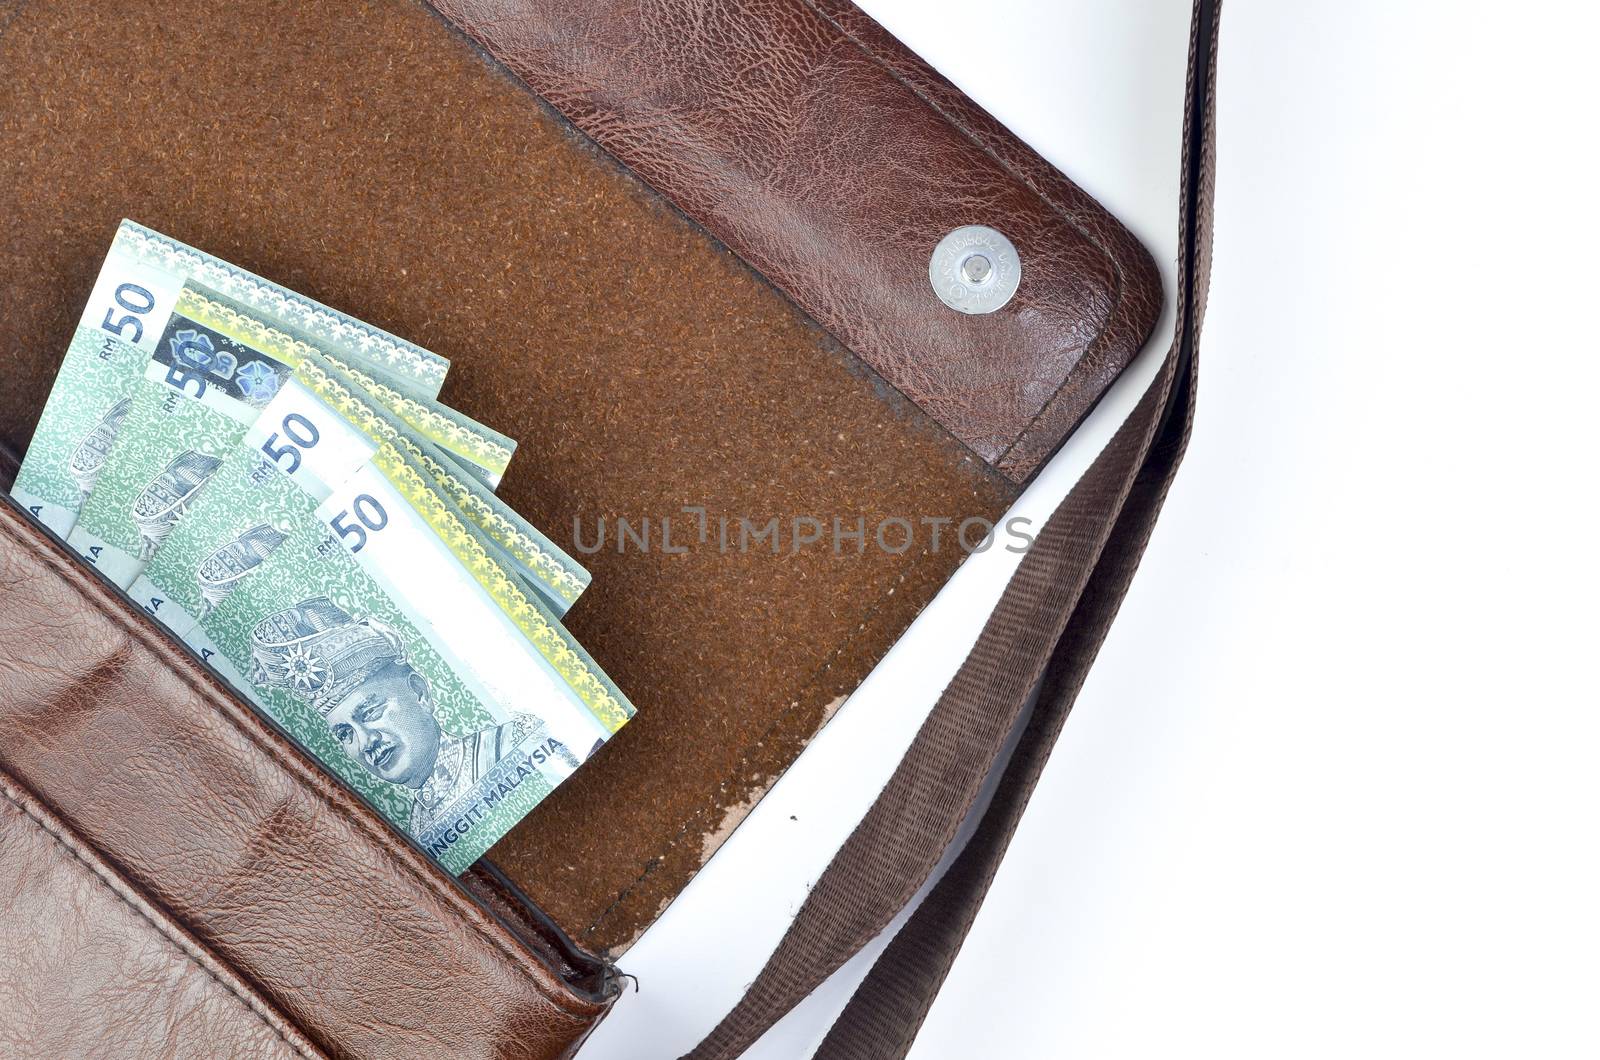 Malaysia bank note with sling bag on white background.